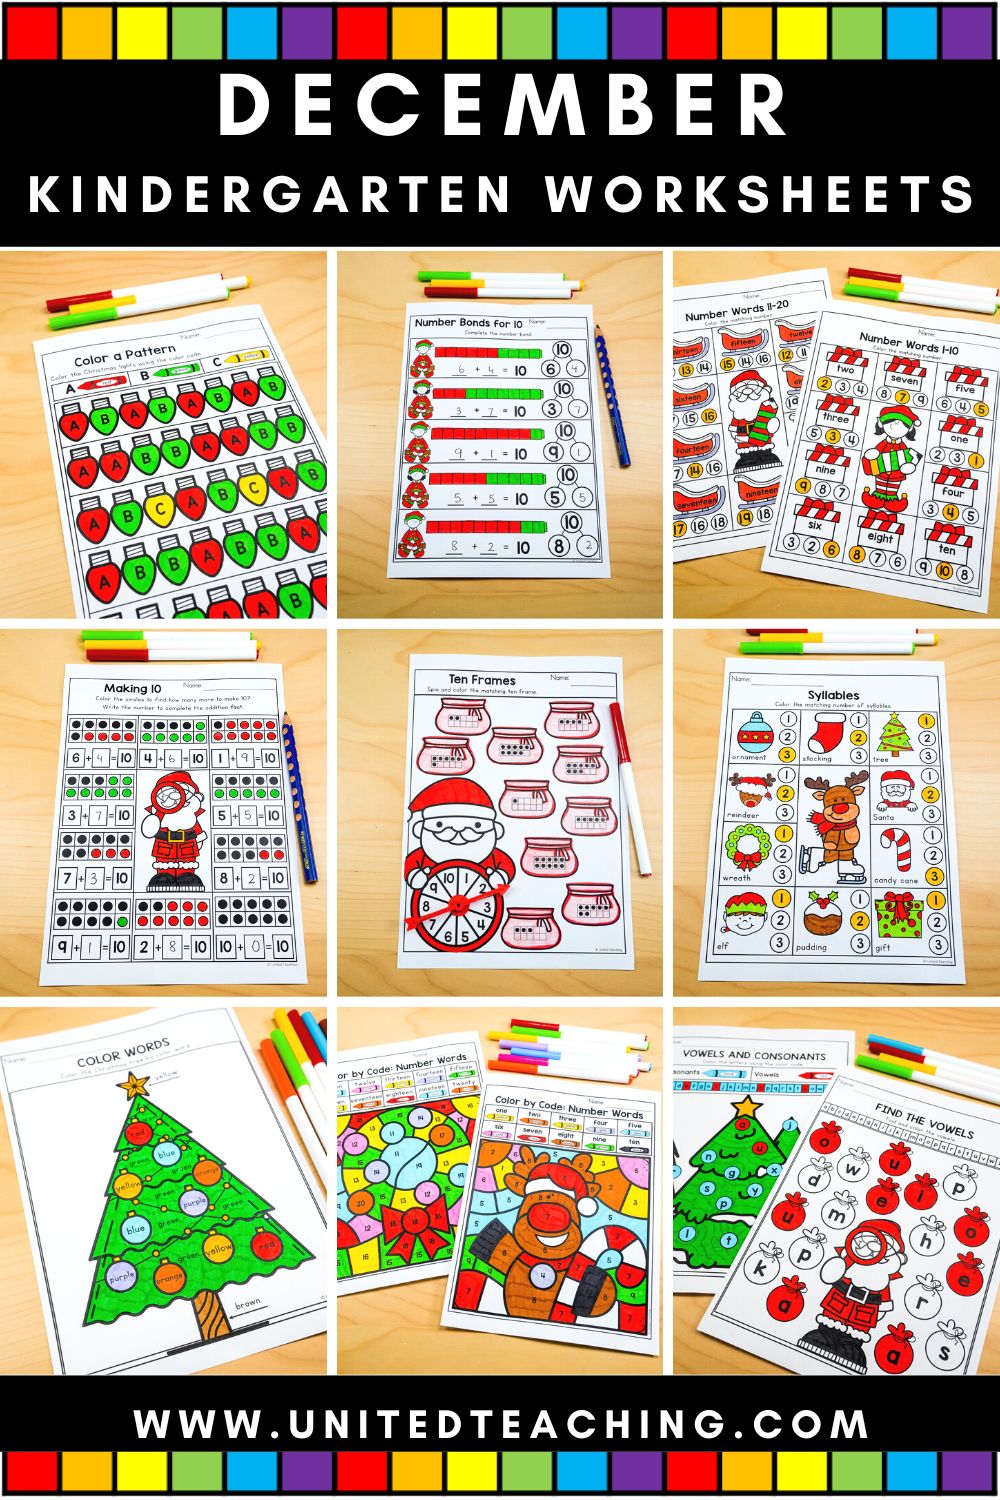 December Math and Literacy kindergarten worksheets pin for later